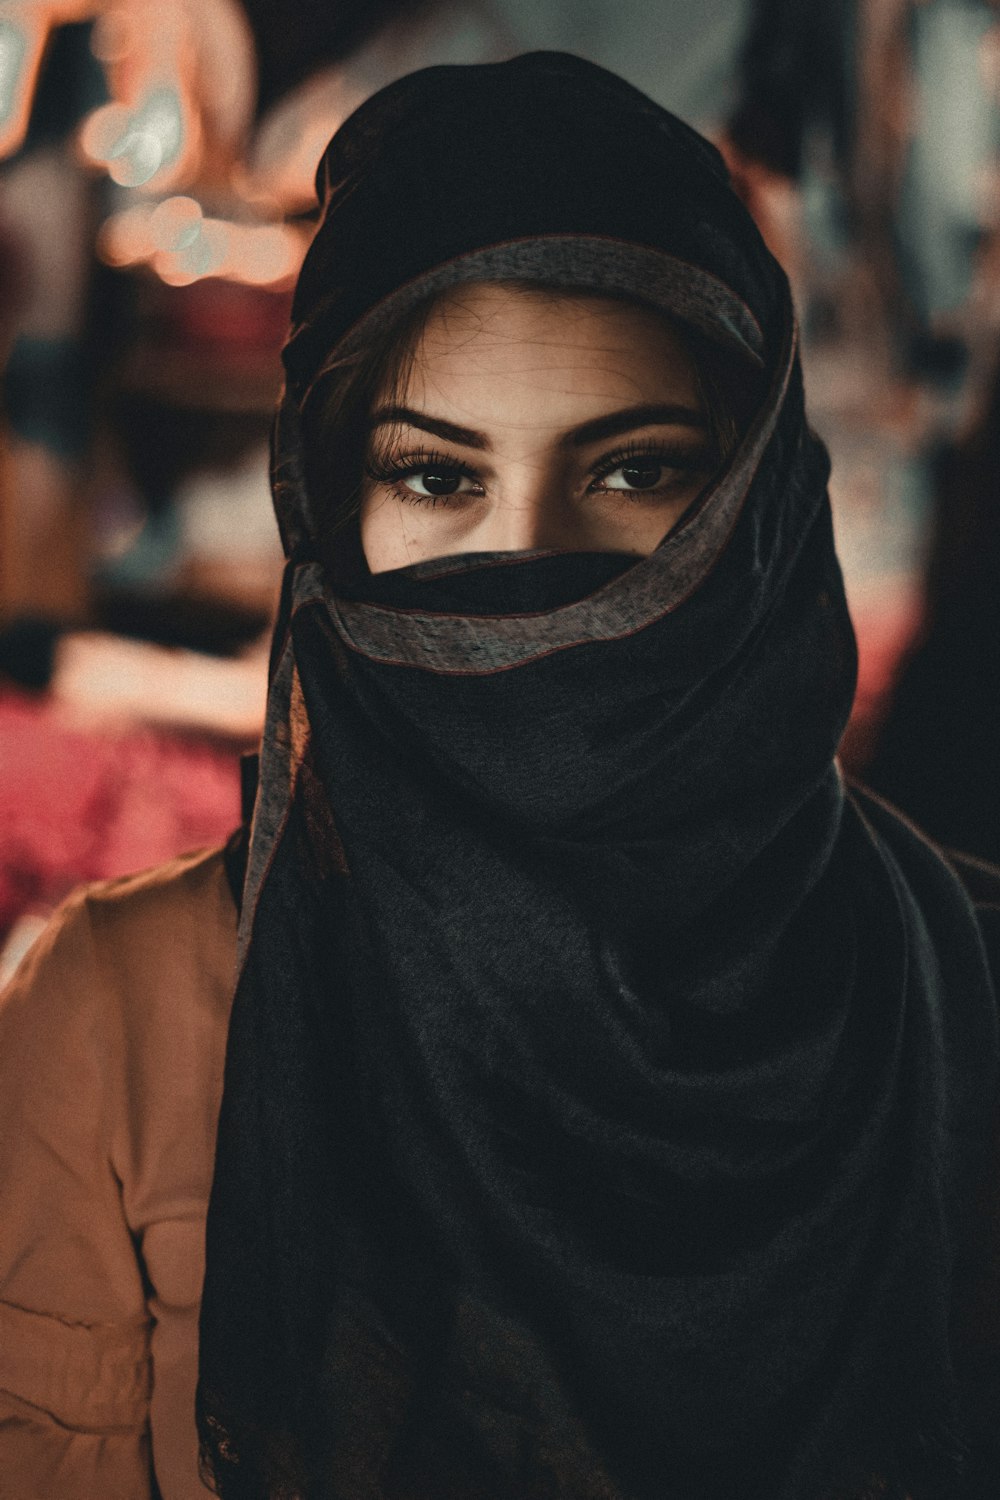 1000+ Muslim Women Pictures | Download Free Images on Unsplash